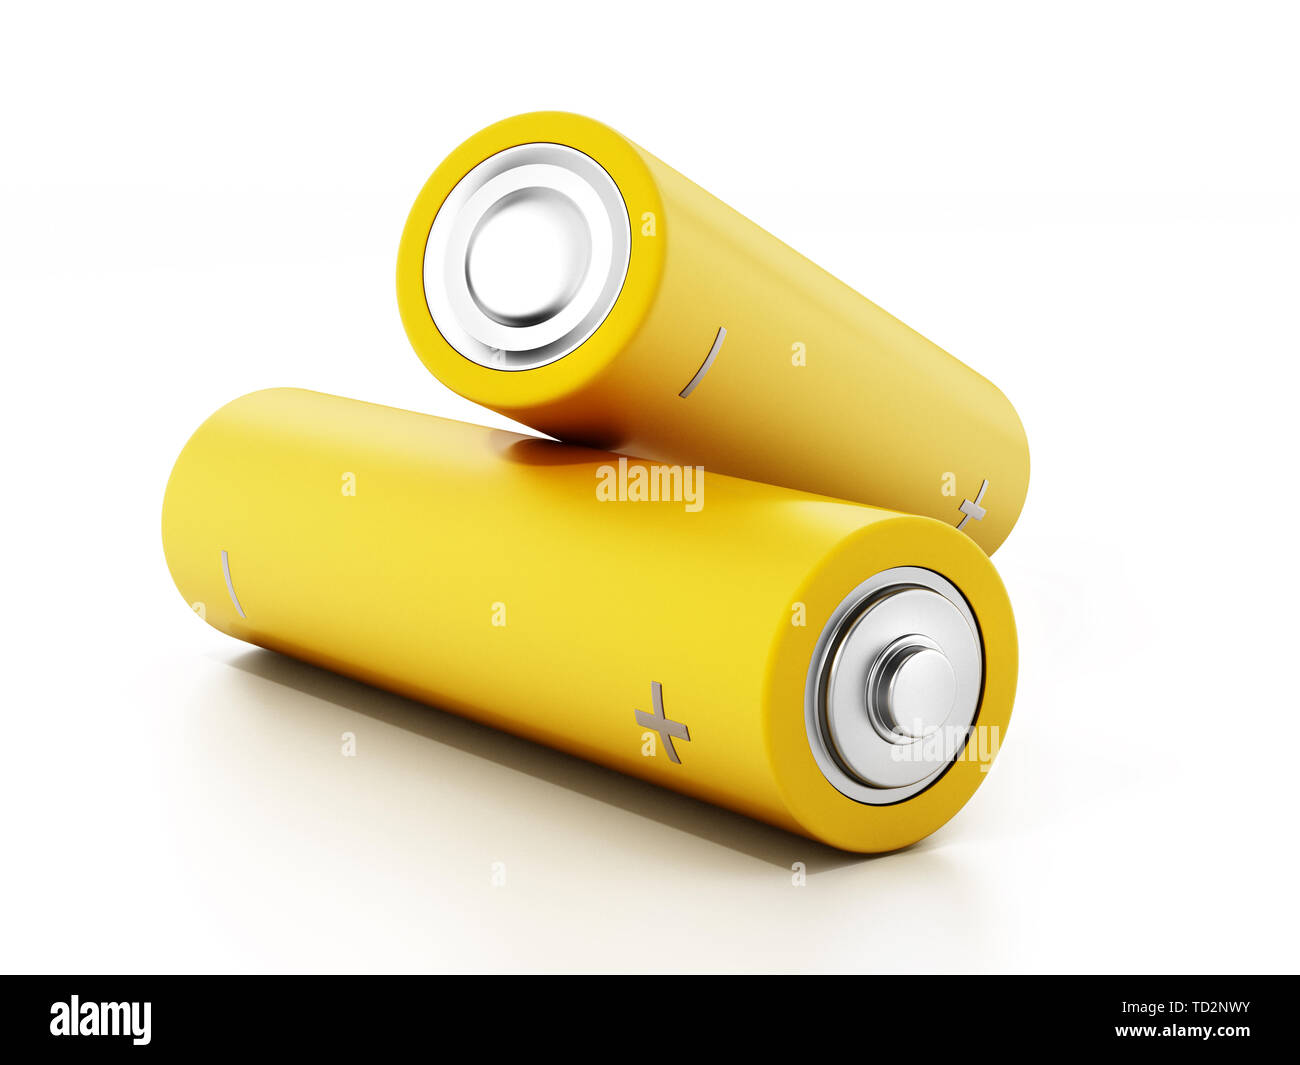 Generic AA batteries isolated on white background. 3D illustration. Stock Photo